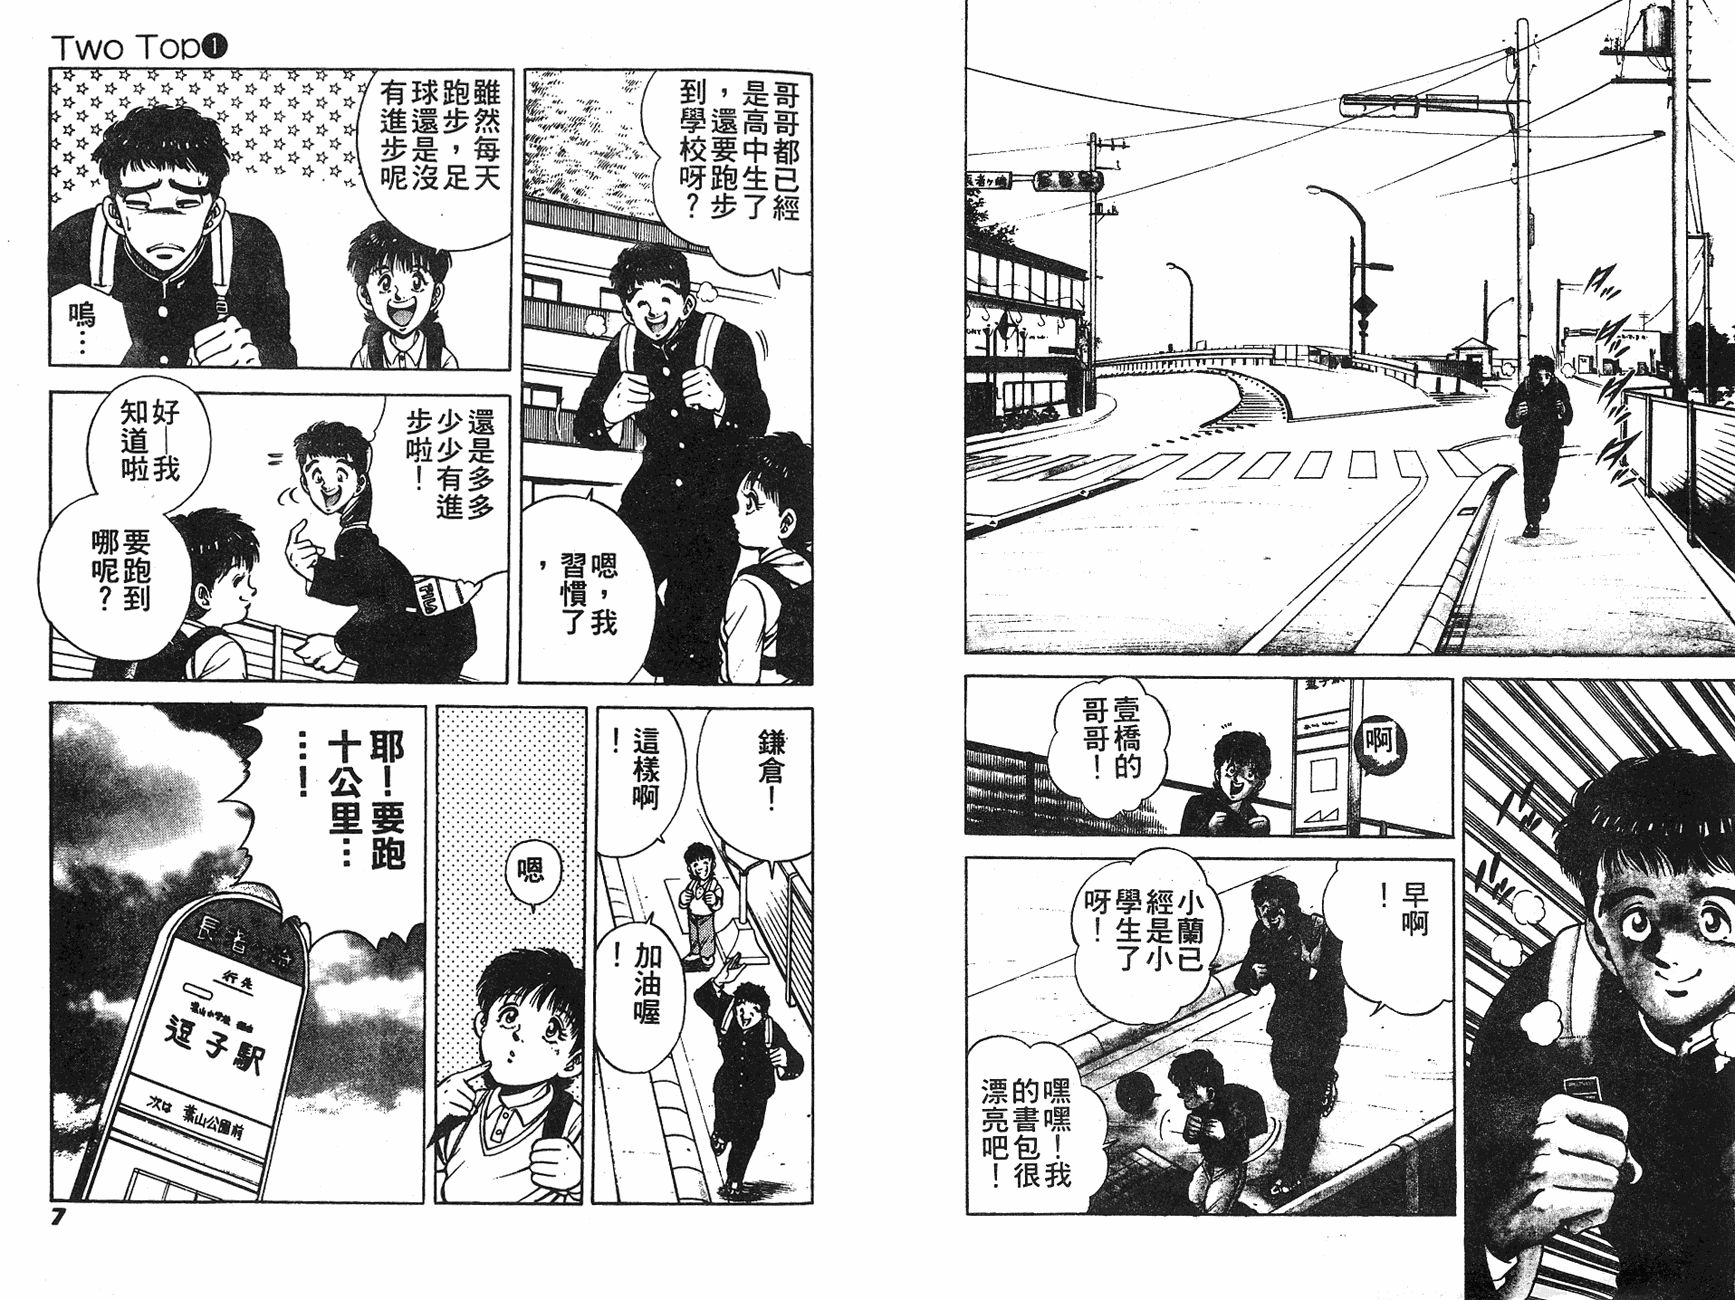 Two Top - 第01卷(1/3) - 5